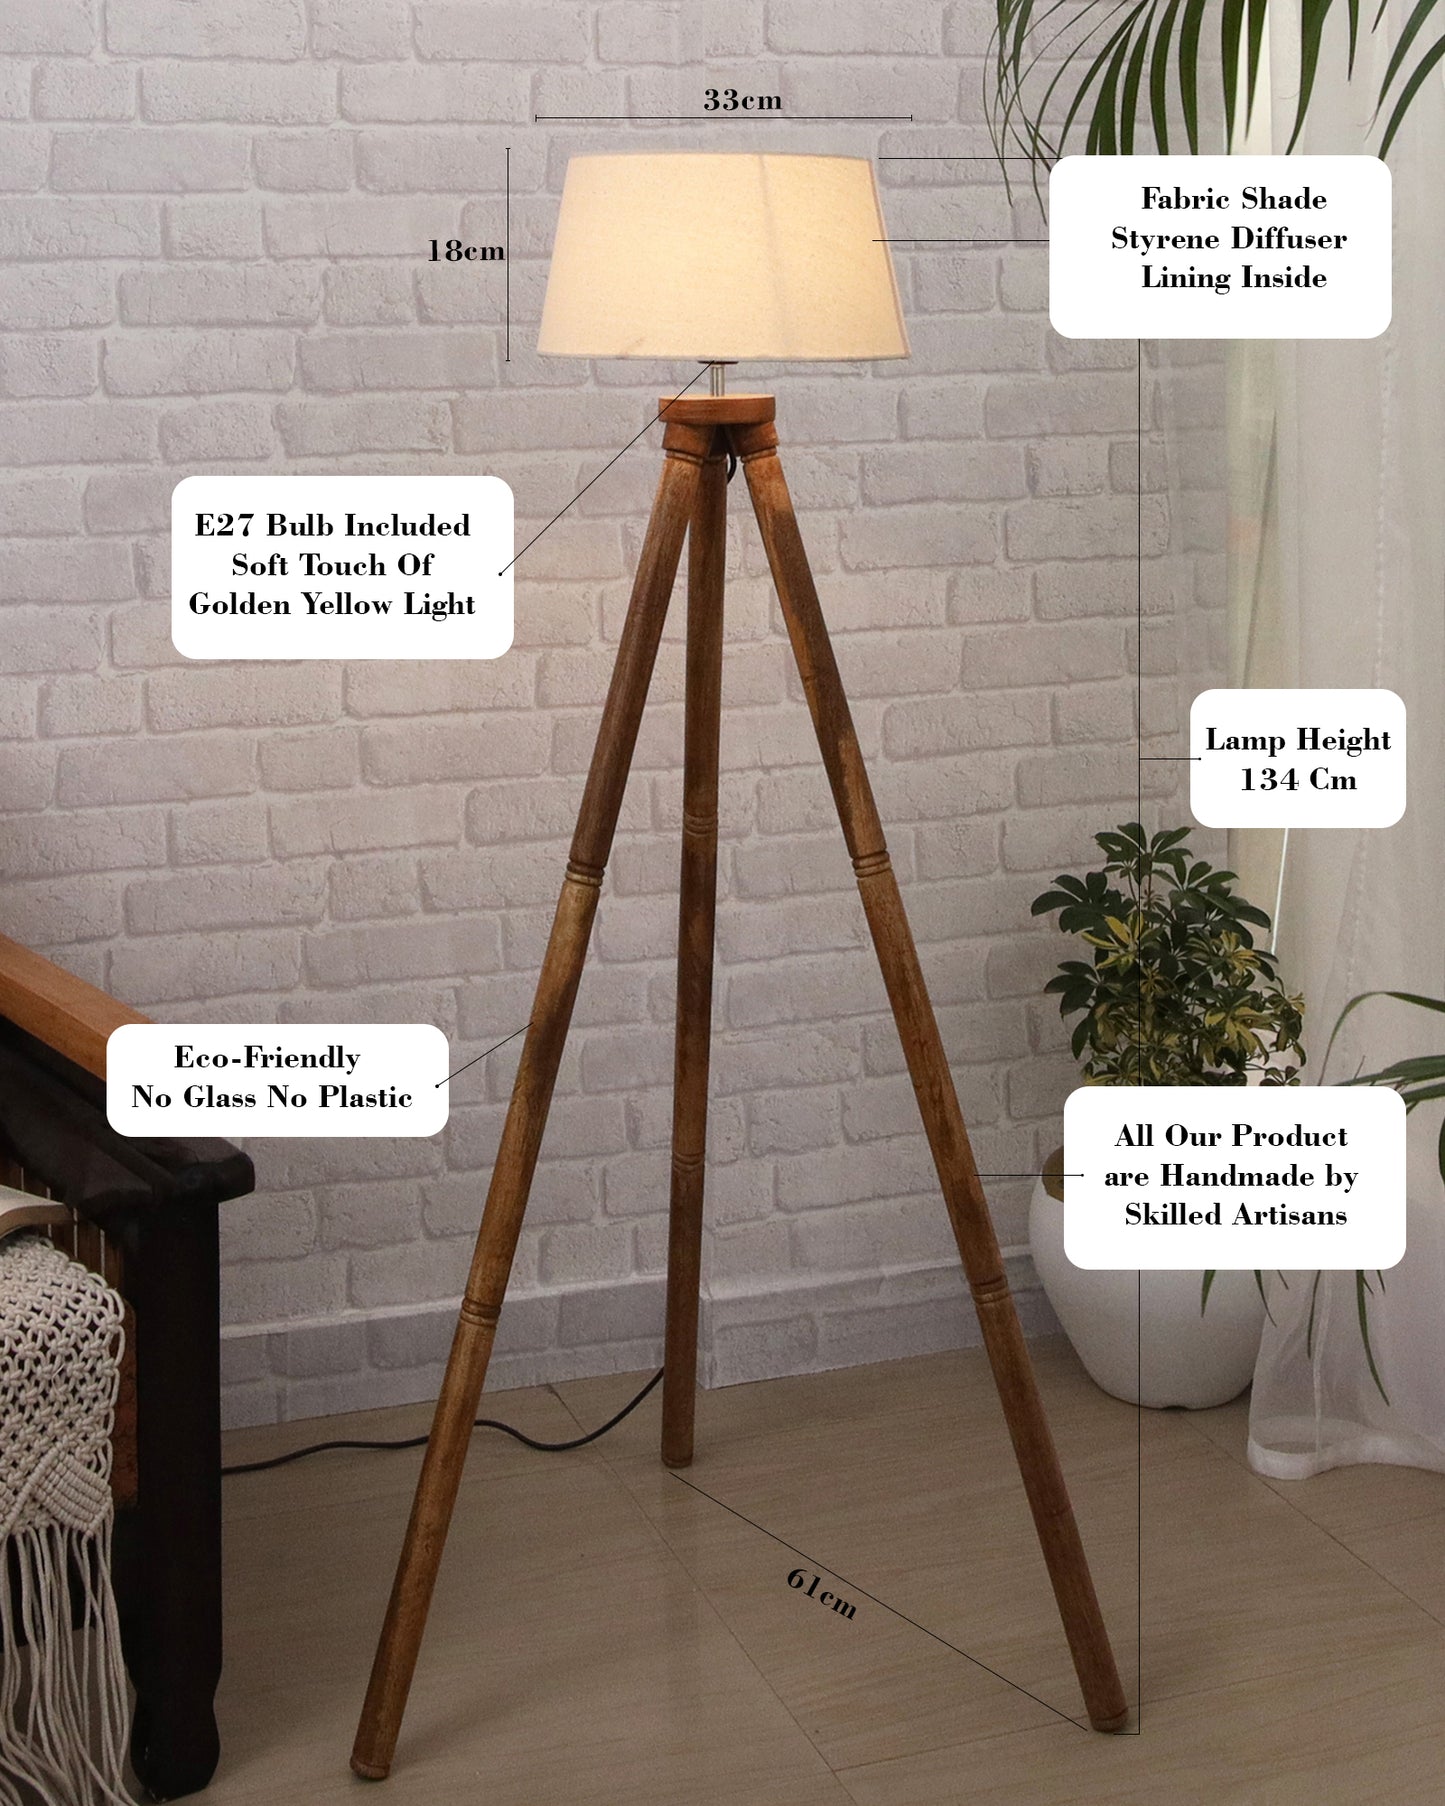 Wood Tripod Floor Lamp, Mid Century Standing Lamp, E27 Lamp Base, With shade Modern Design Floor Reading Lamp for Living Room Bedroom, Study Room and Office